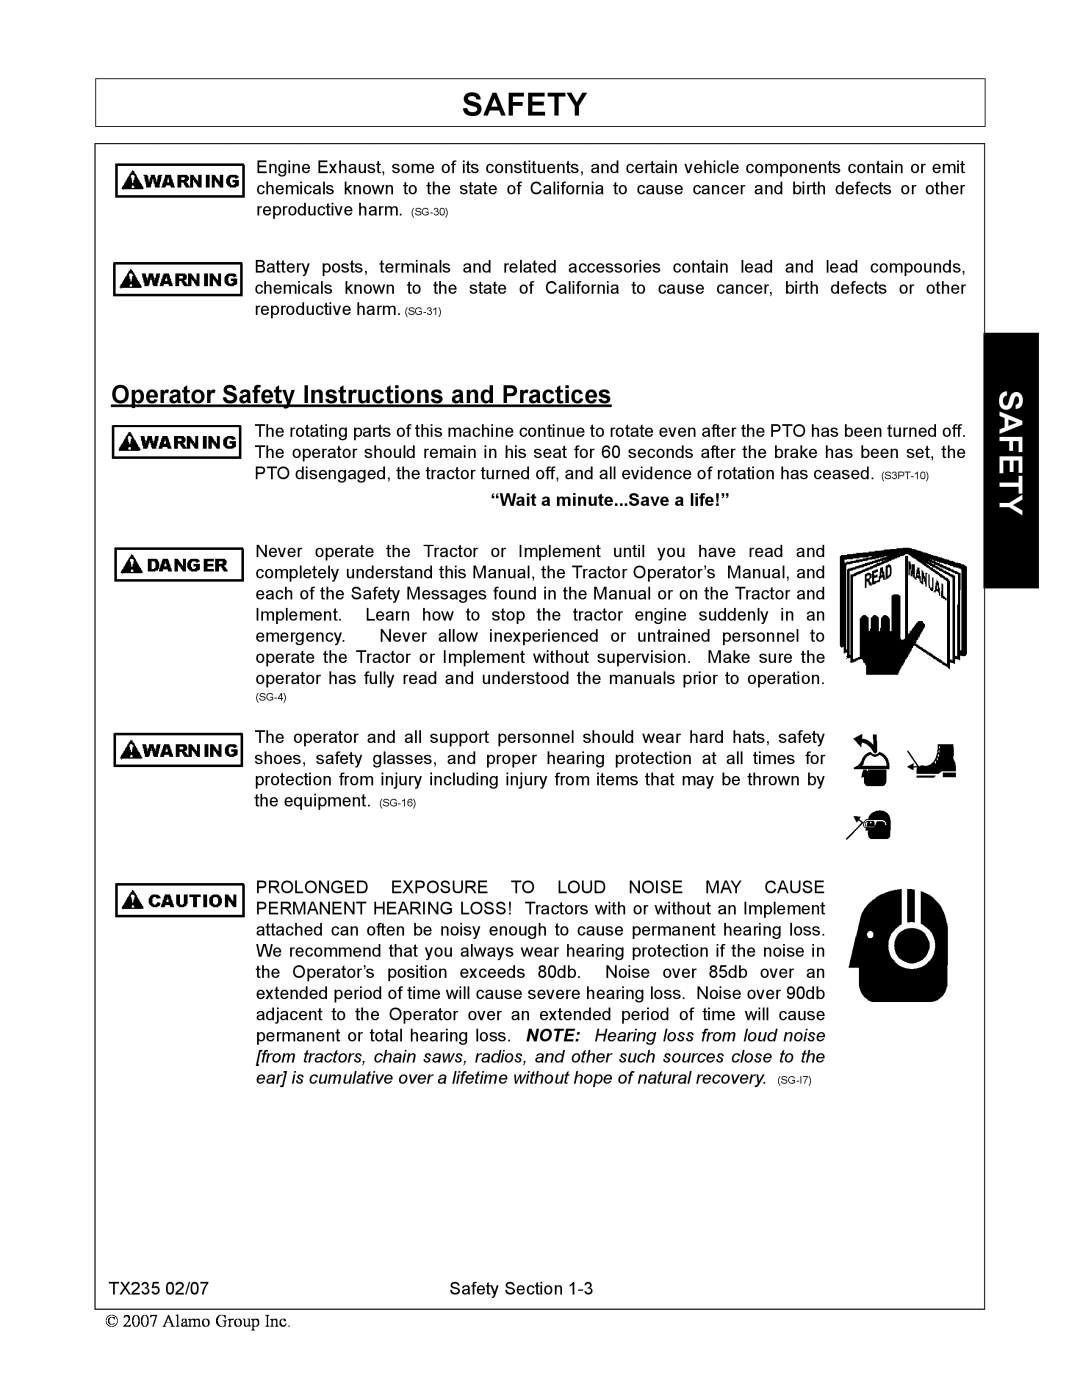 Alamo TX235 manual Operator Safety Instructions and Practices, “Wait a minute...Save a life!” 